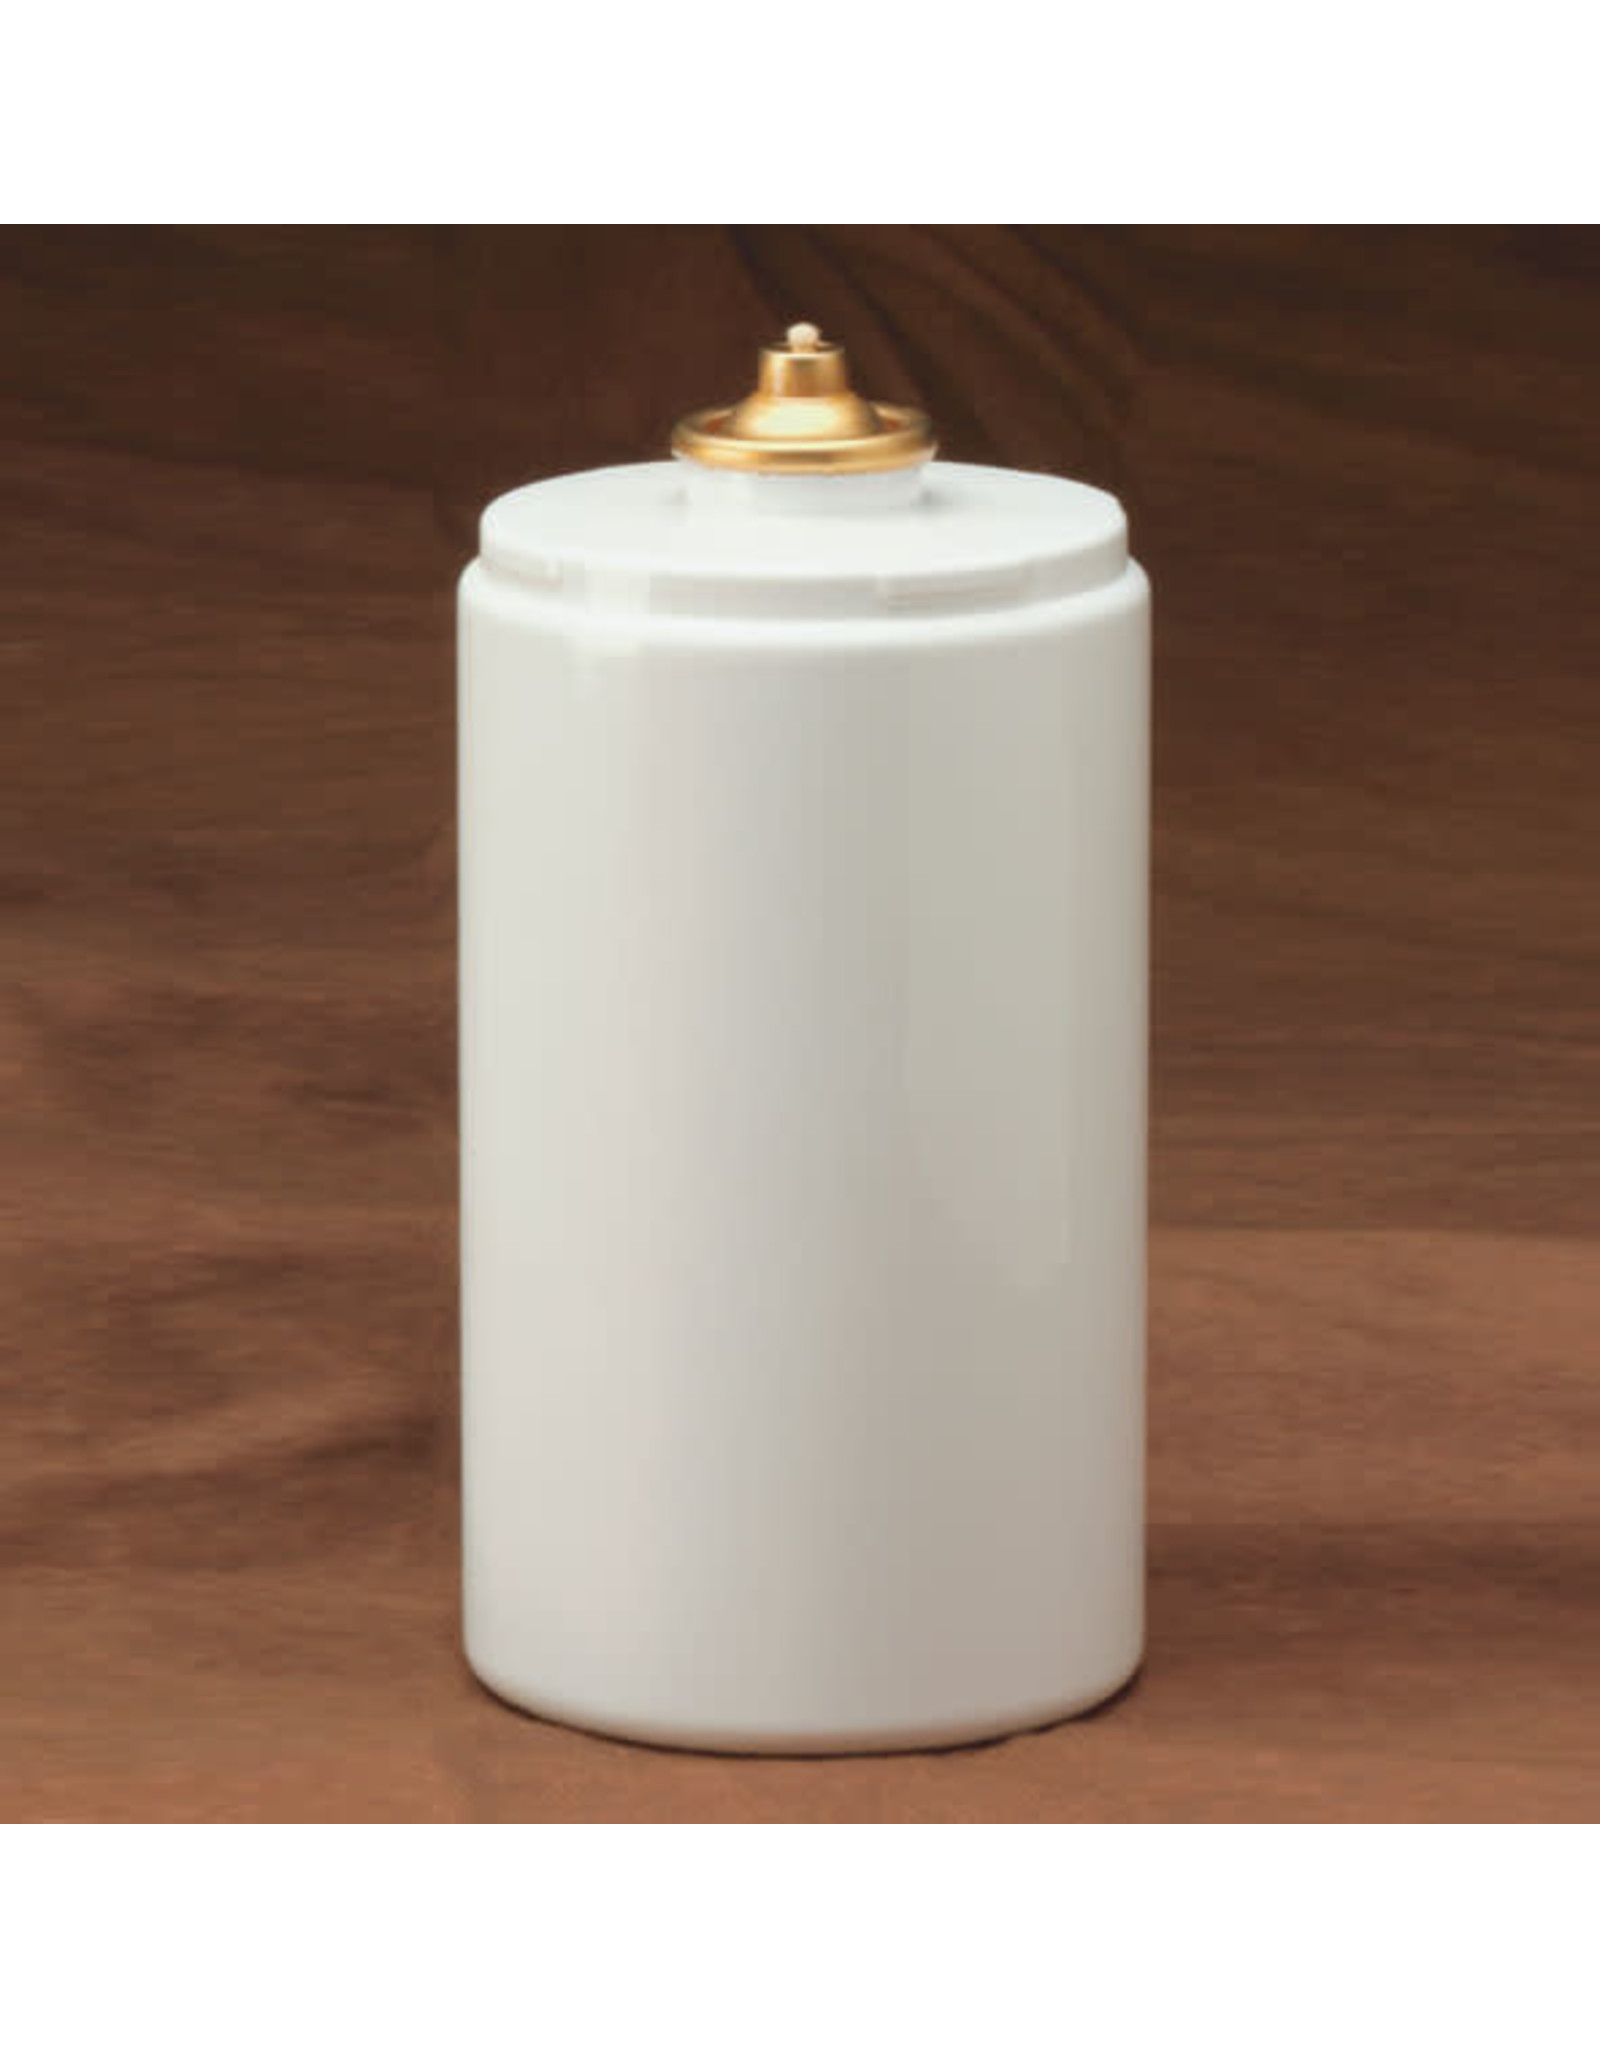 Emkay (Muench-Kreuzer) Disposable Oil Containers 170-hr (12)